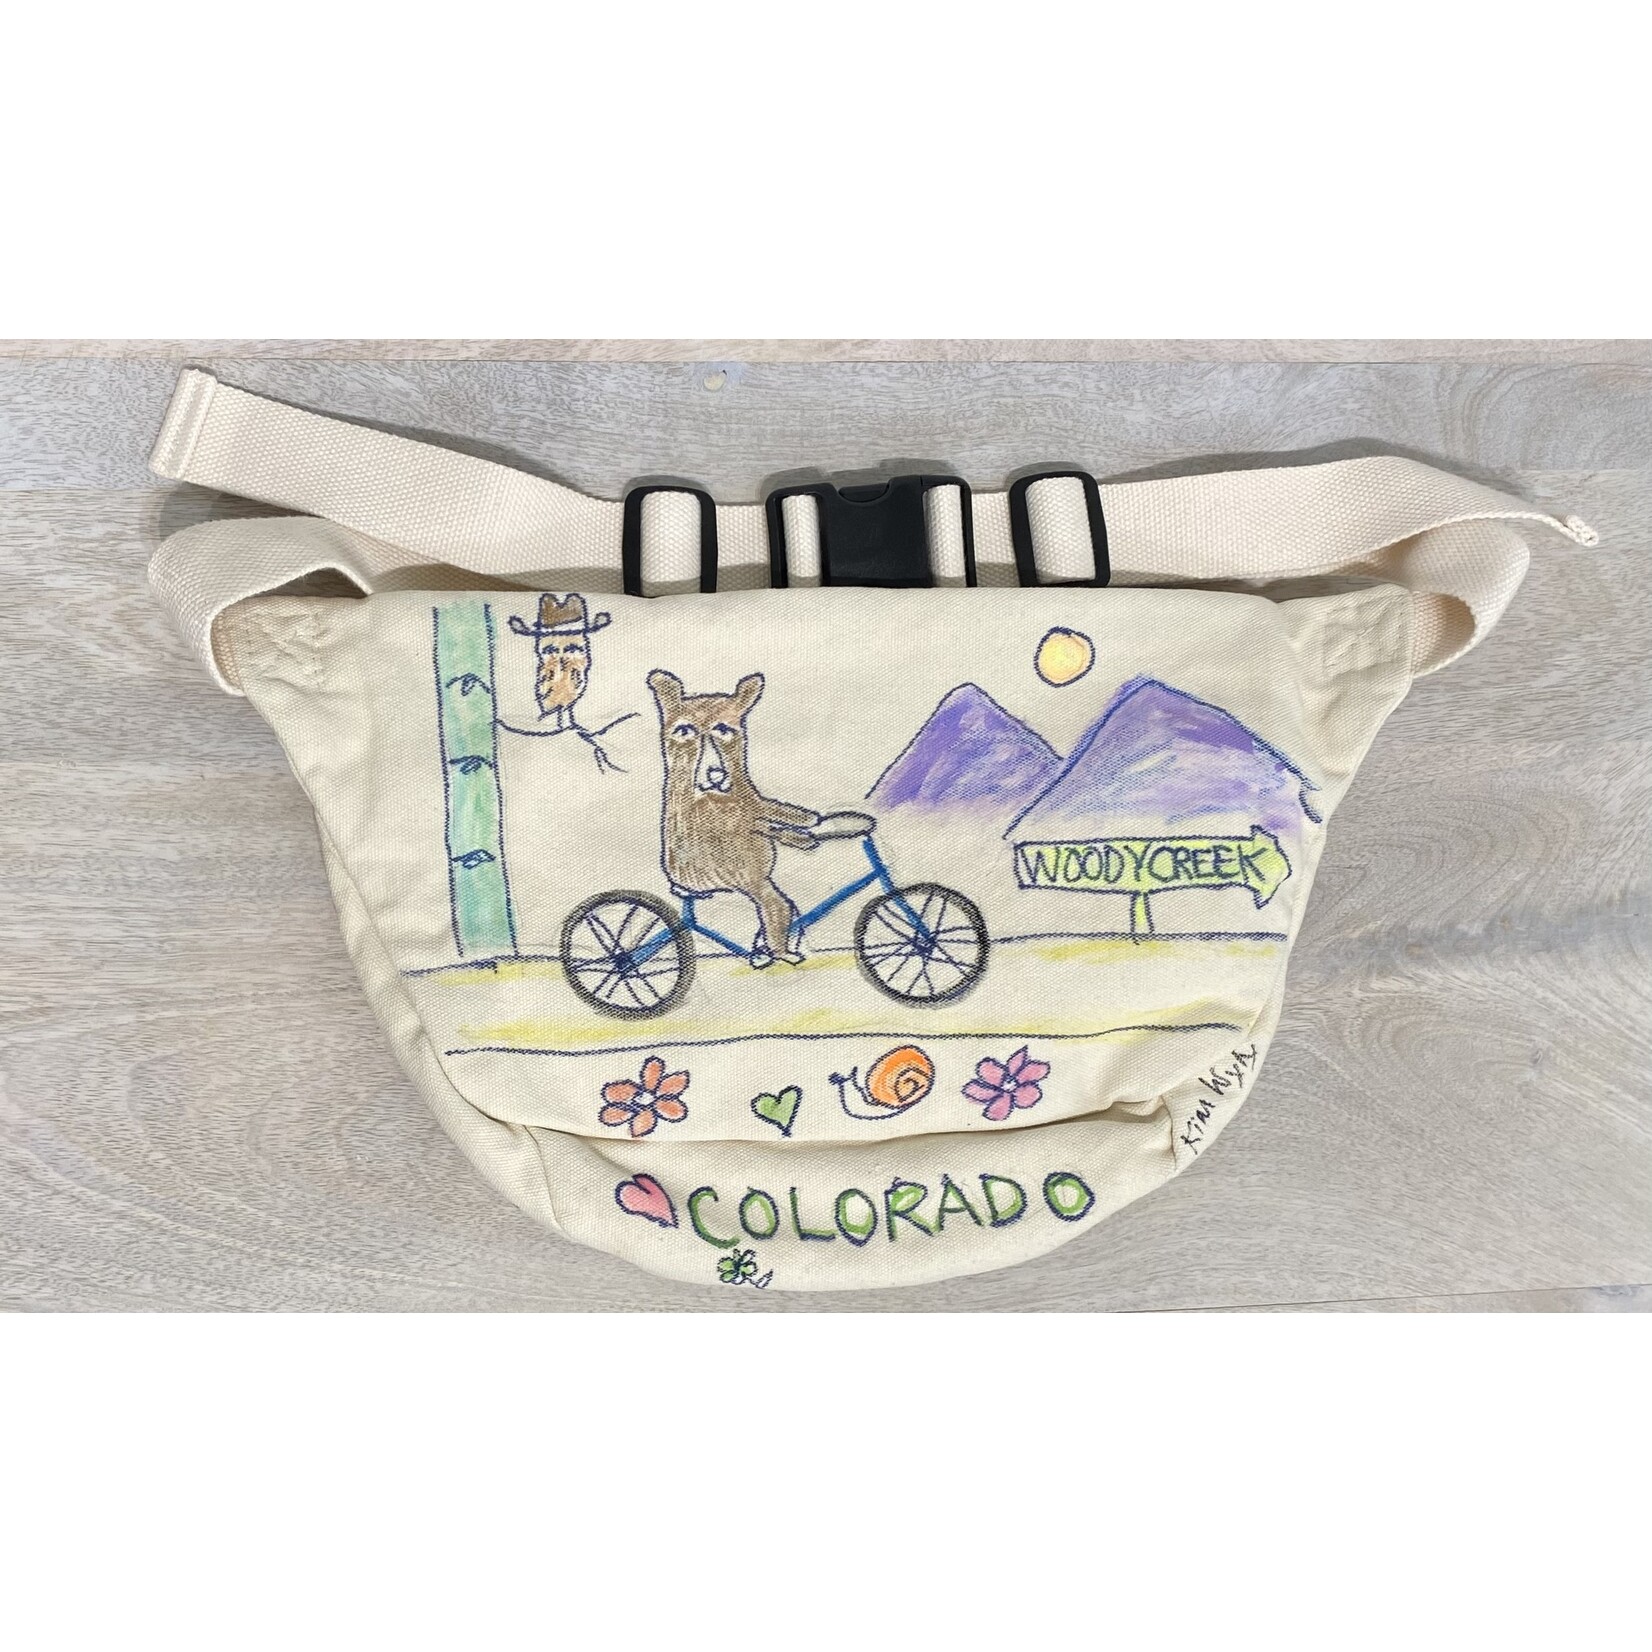 Kim Wyly Hand Painted Canvas Belt Bag - 81611 Life